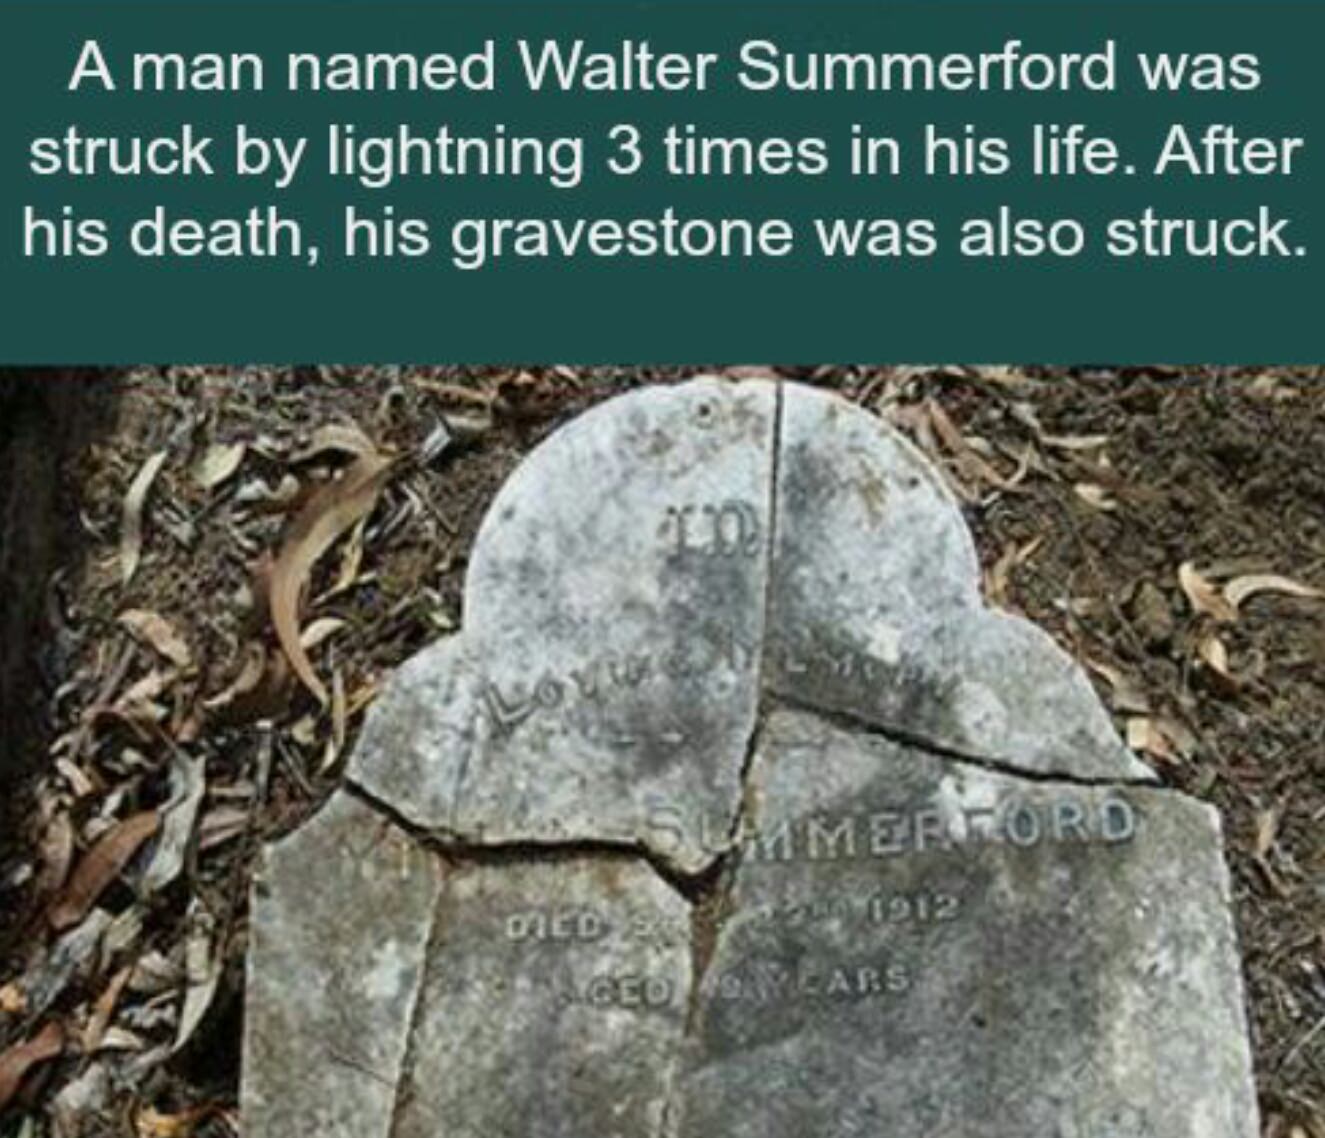 gravestone struck by lightning - A man named Walter Summerford was struck by lightning 3 times in his life. After his death, his gravestone was also struck. Summer Ford Died 1912 Georgiars